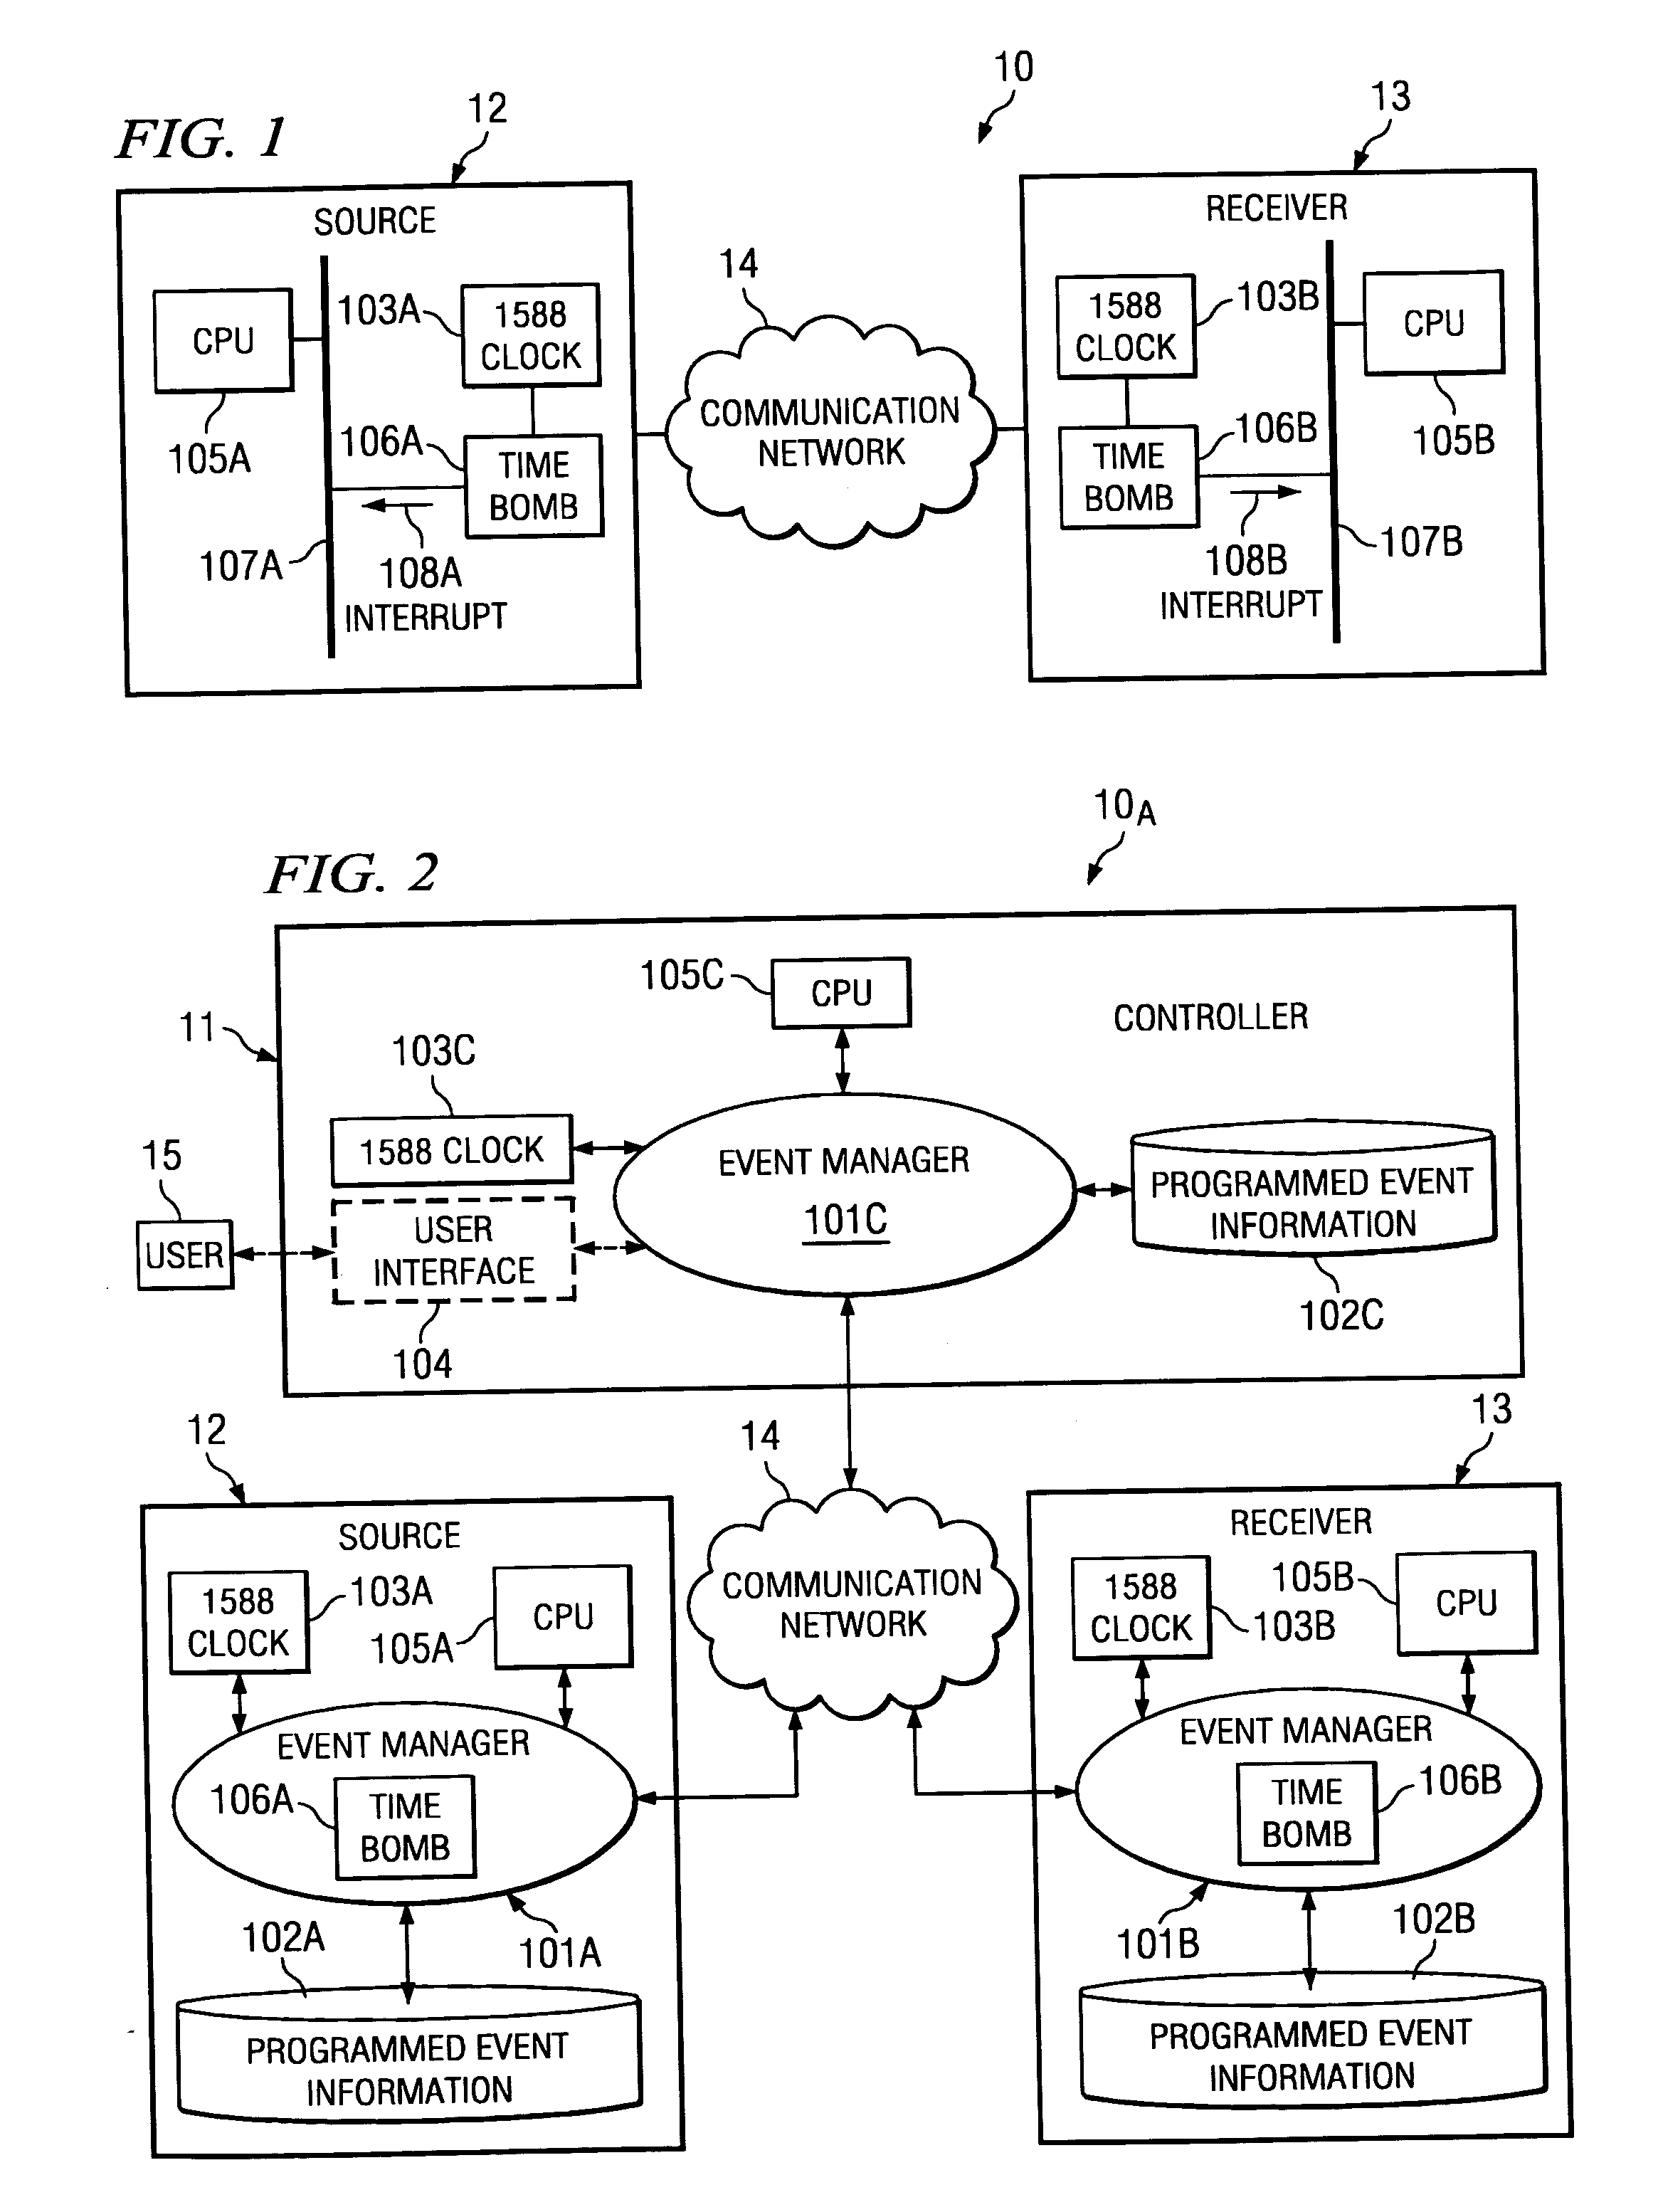 System and method for coordinating the actions of a plurality of devices via scheduling the actions based on synchronized local clocks